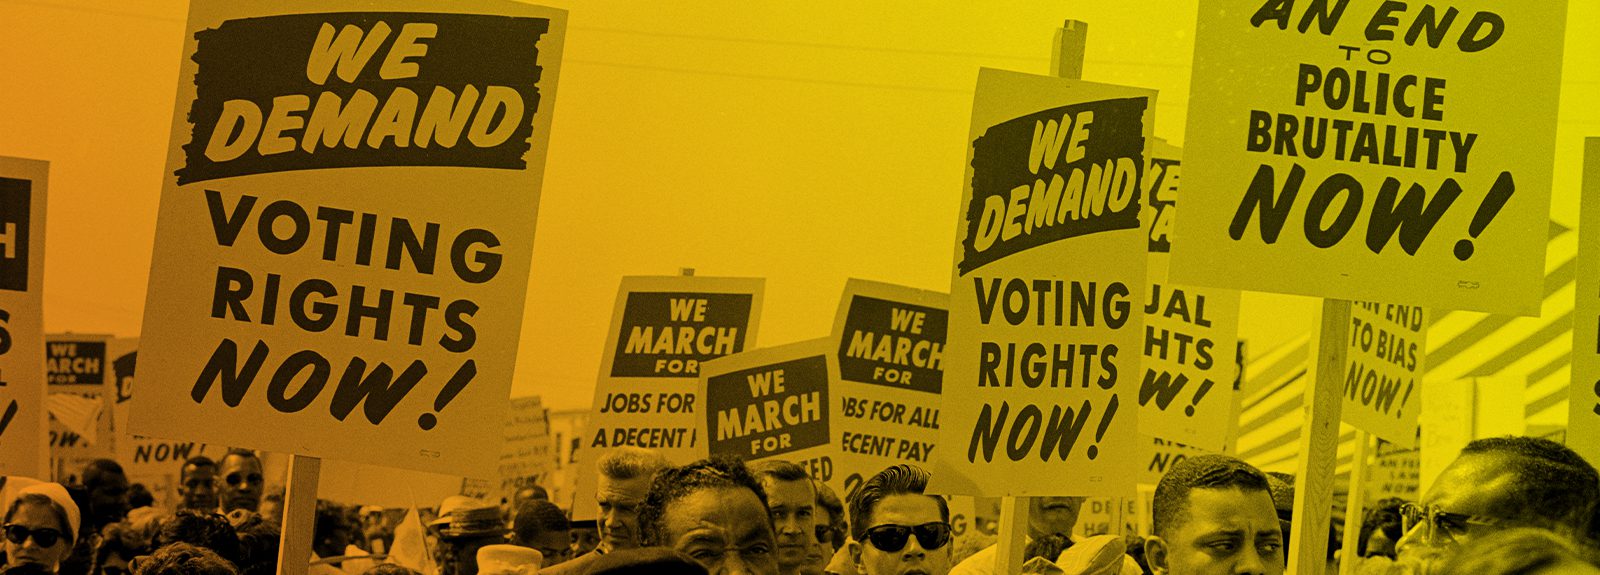 1960s voting rights protesters